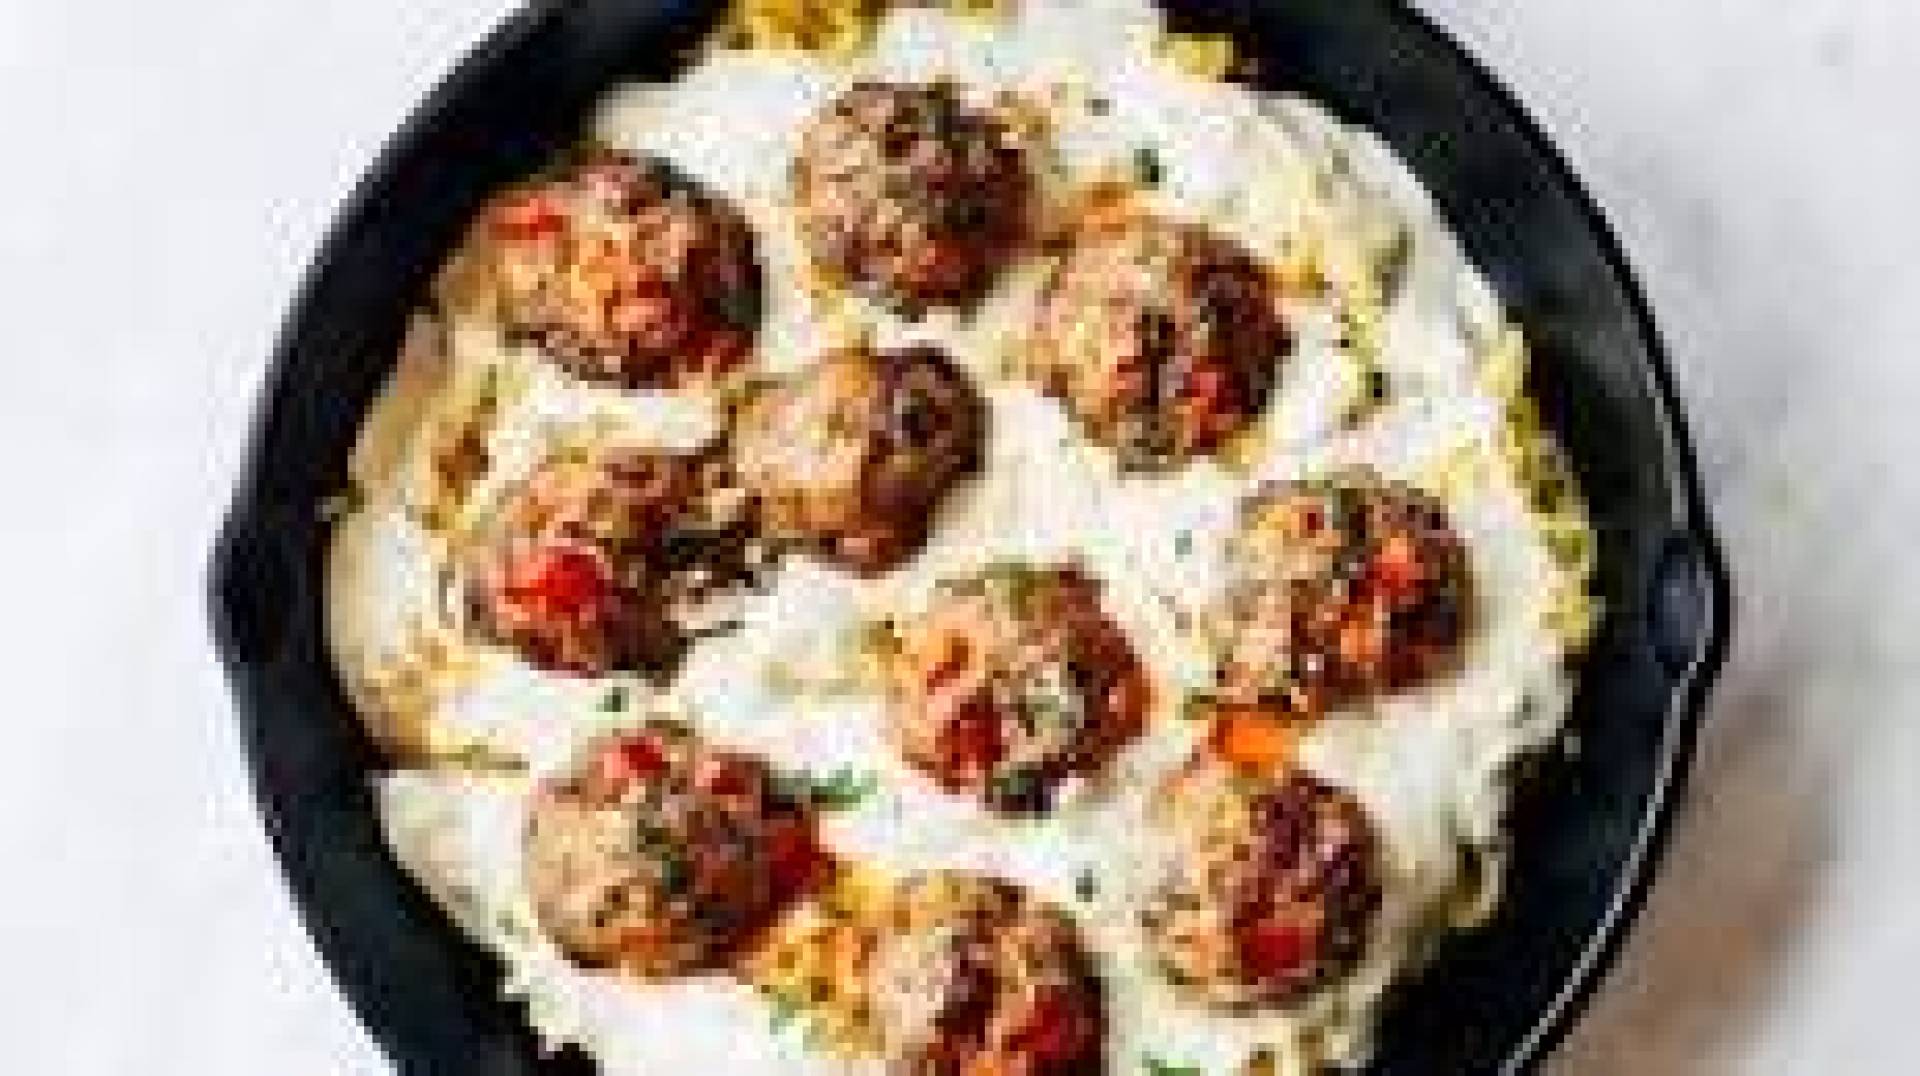 Meatballs with alfredo Sauce and heart of palm noodles